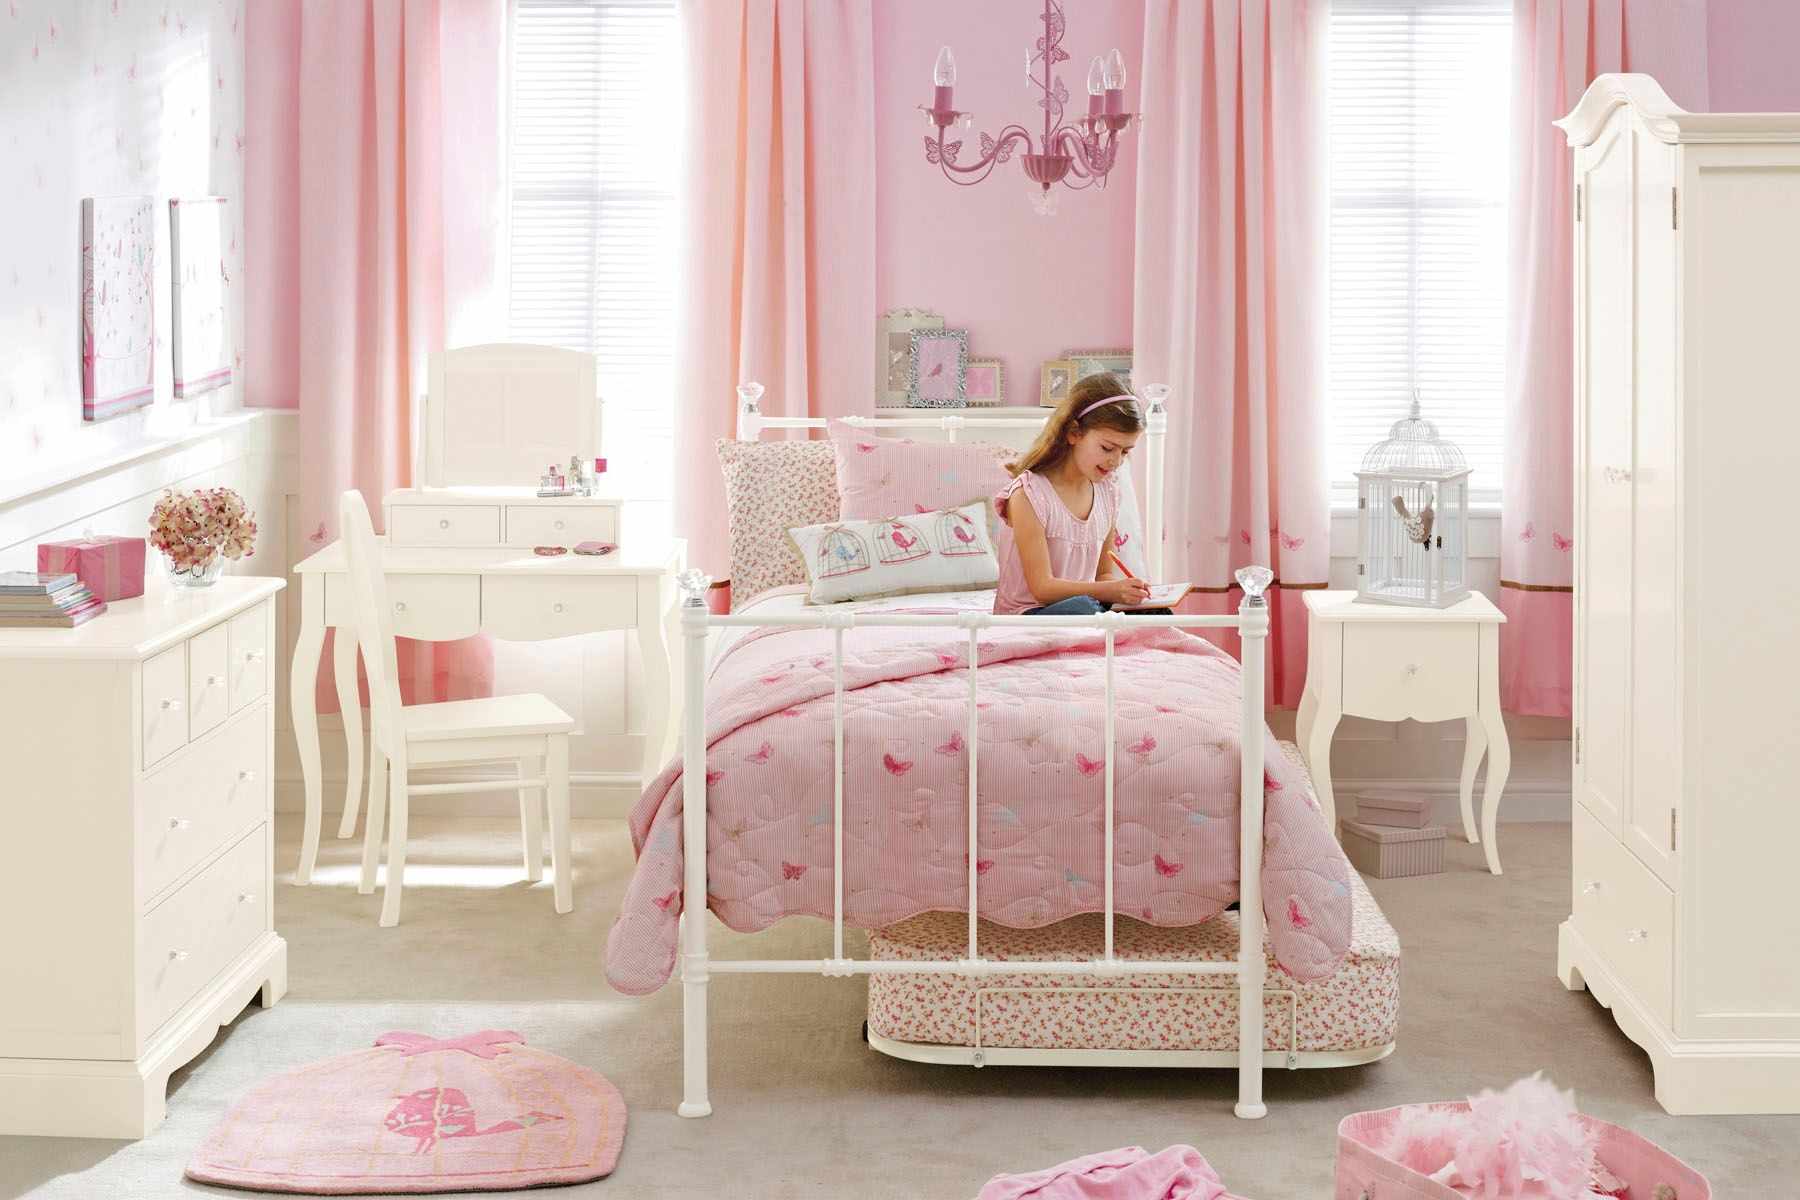 variant of a beautiful bedroom style for a girl